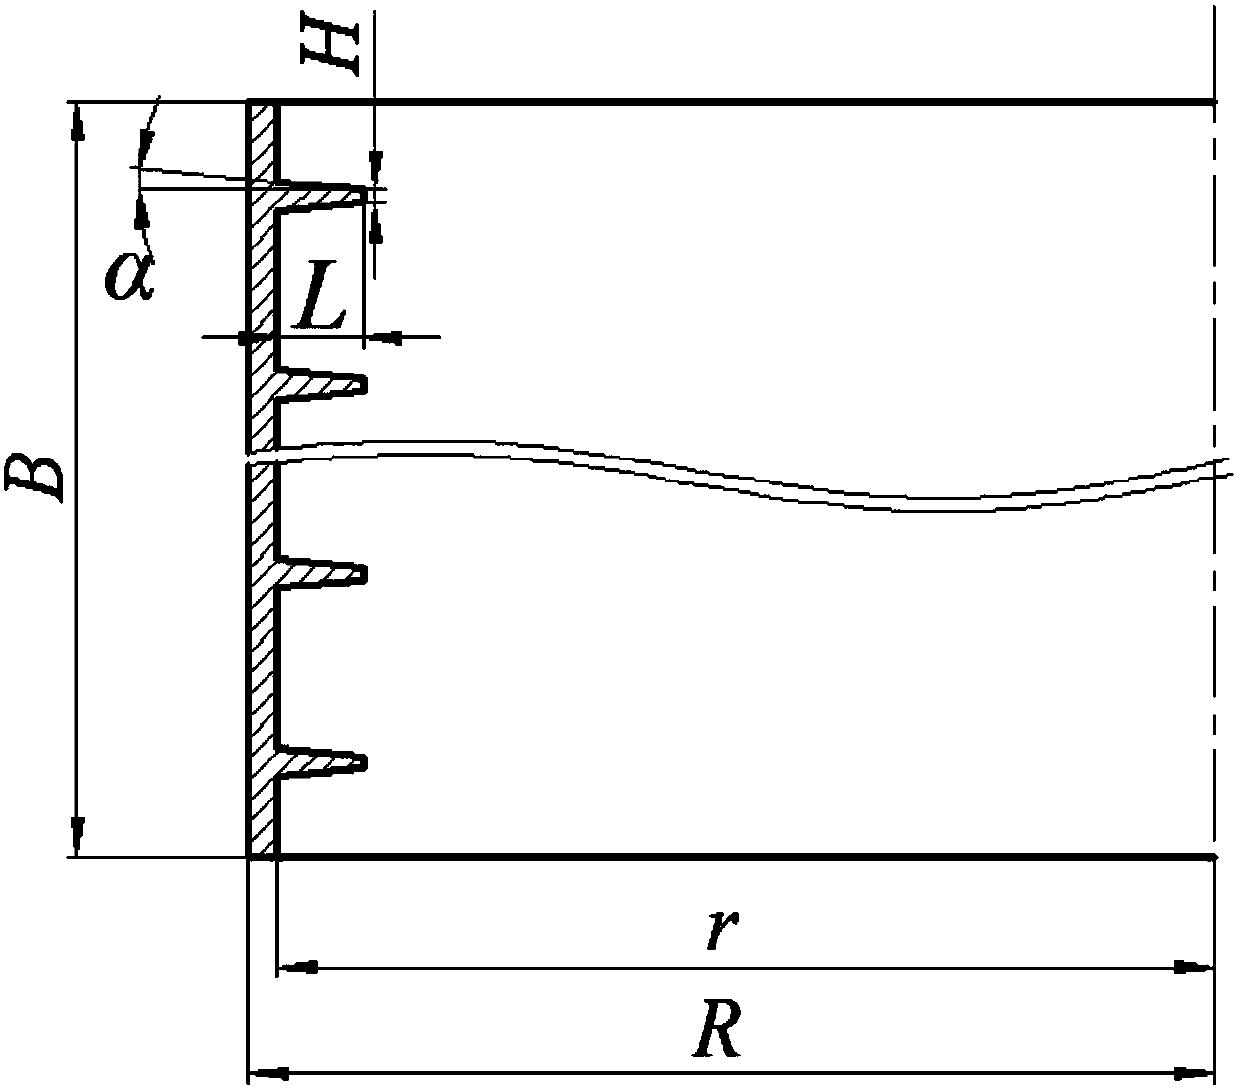 A Roll-Extrusion Composite Forming Method for Thin-walled Ring Parts with Ribs and Large Height-to-Diameter Ratio